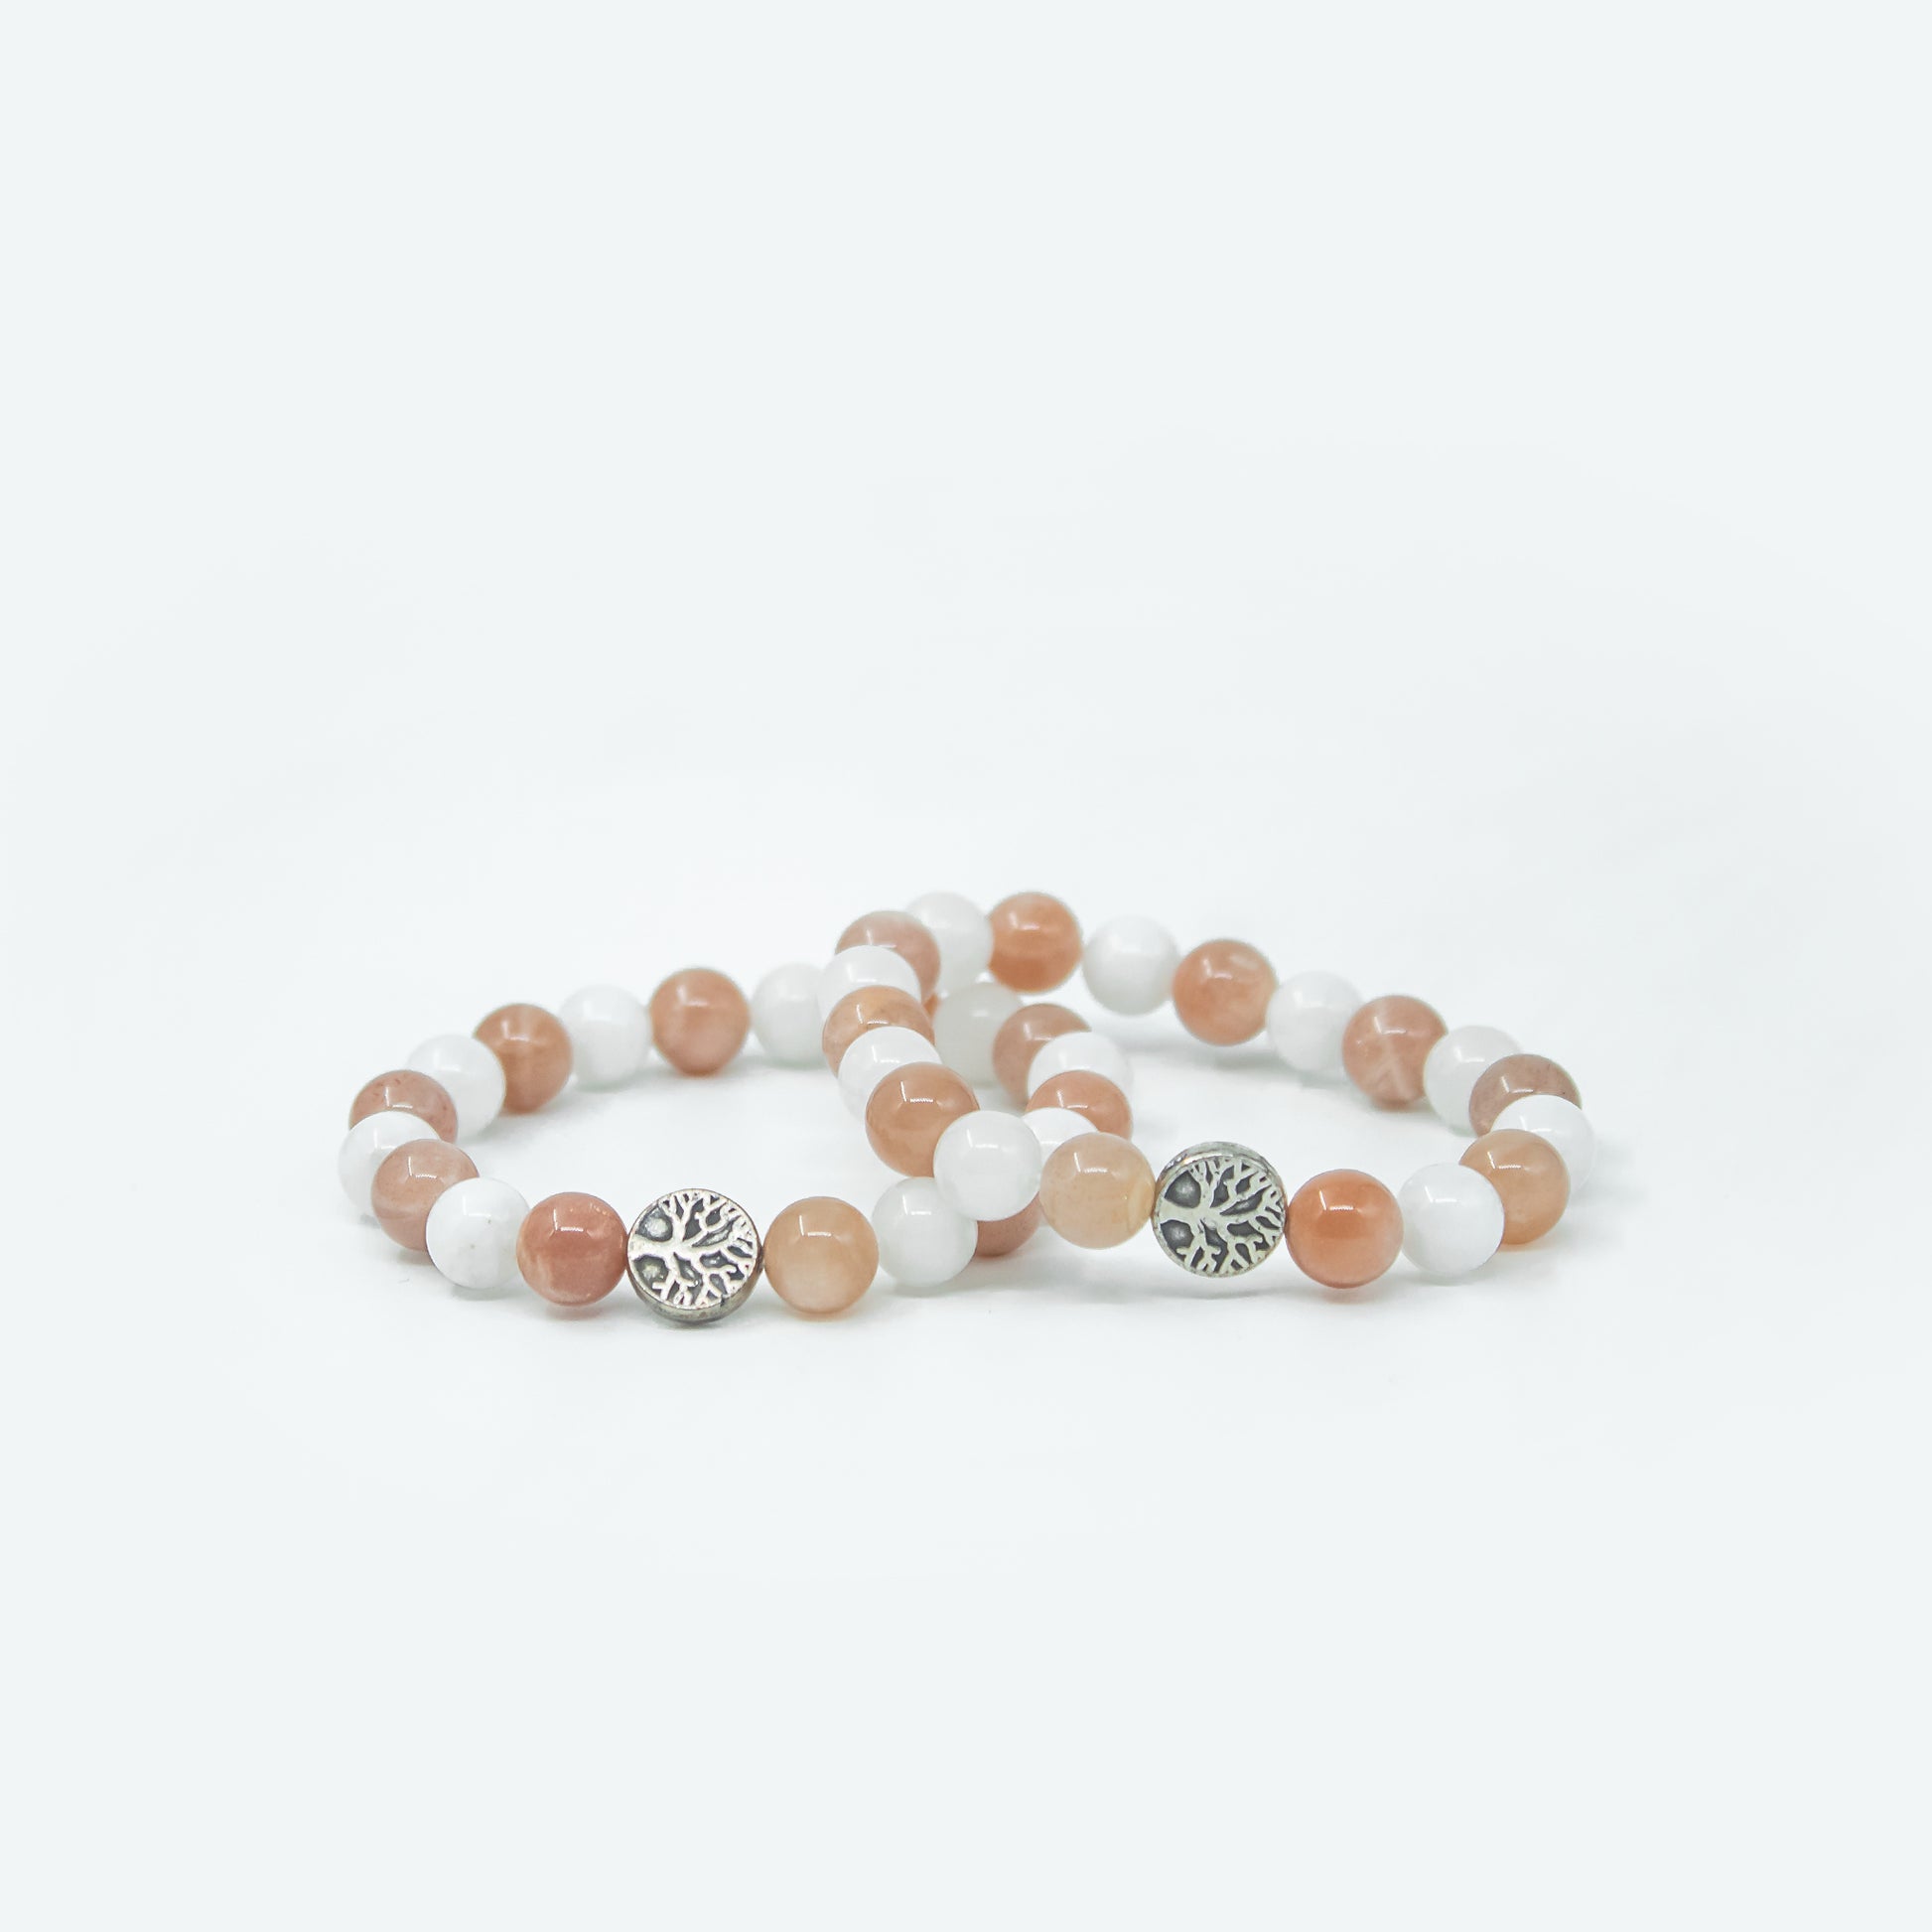 sunstone and moonstone bracelet with charm